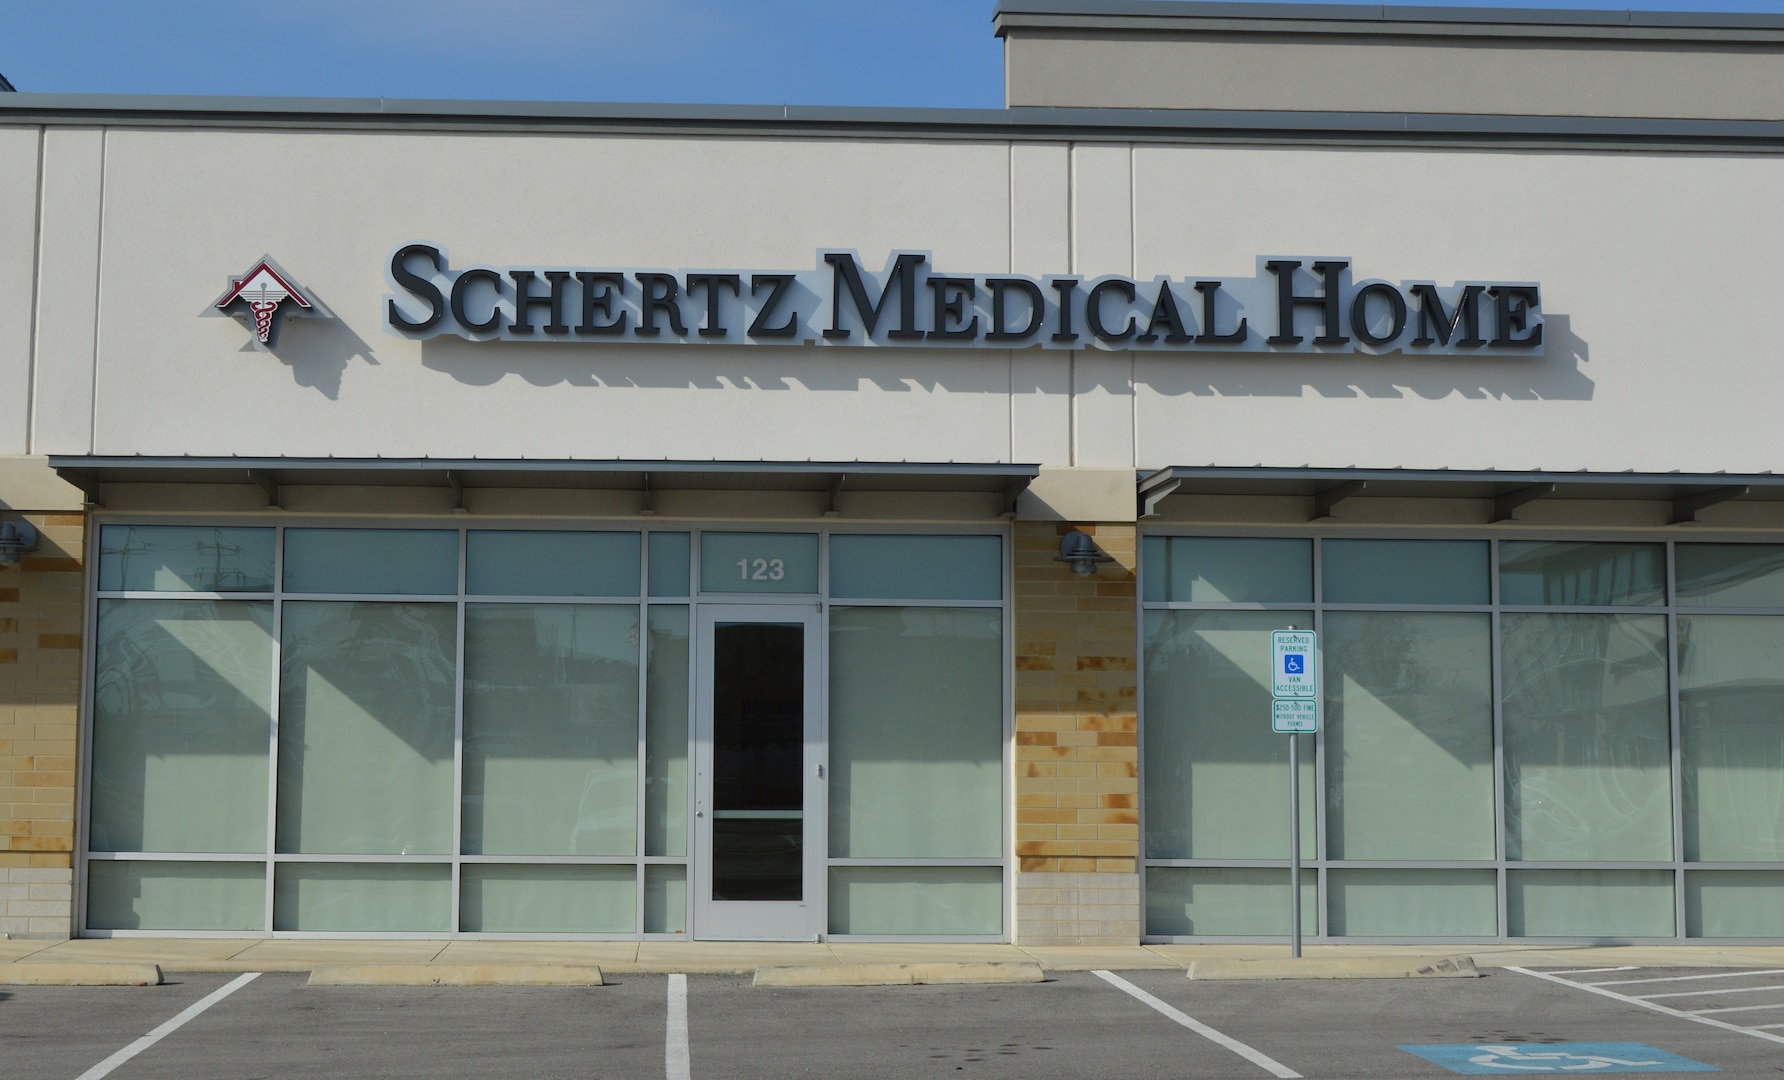 The Schertz Medical Home is moving into a larger facility to meet the growing needs of its patient population April 30. A ribbon-cutting ceremony will be held at 11 a.m. May 2 at the new location, 17115 Interstate 35 North, Suite 123.